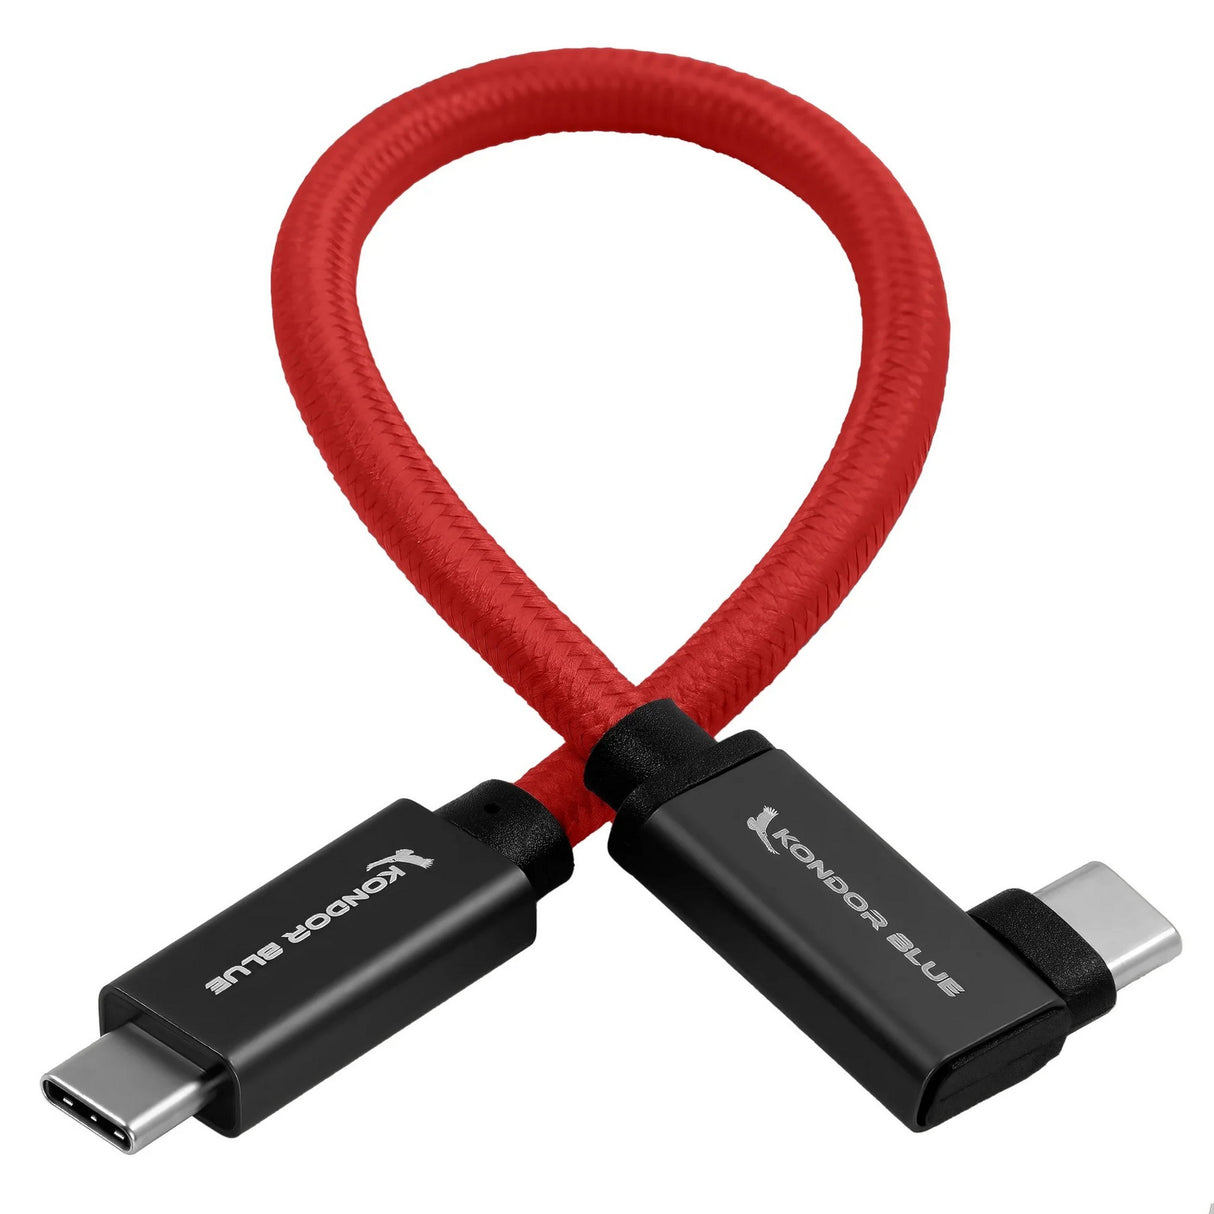 Kondor Blue USB C to USB C High Speed Cable for Samsung T5 T7 SSD, Right Angle, Cardinal Red